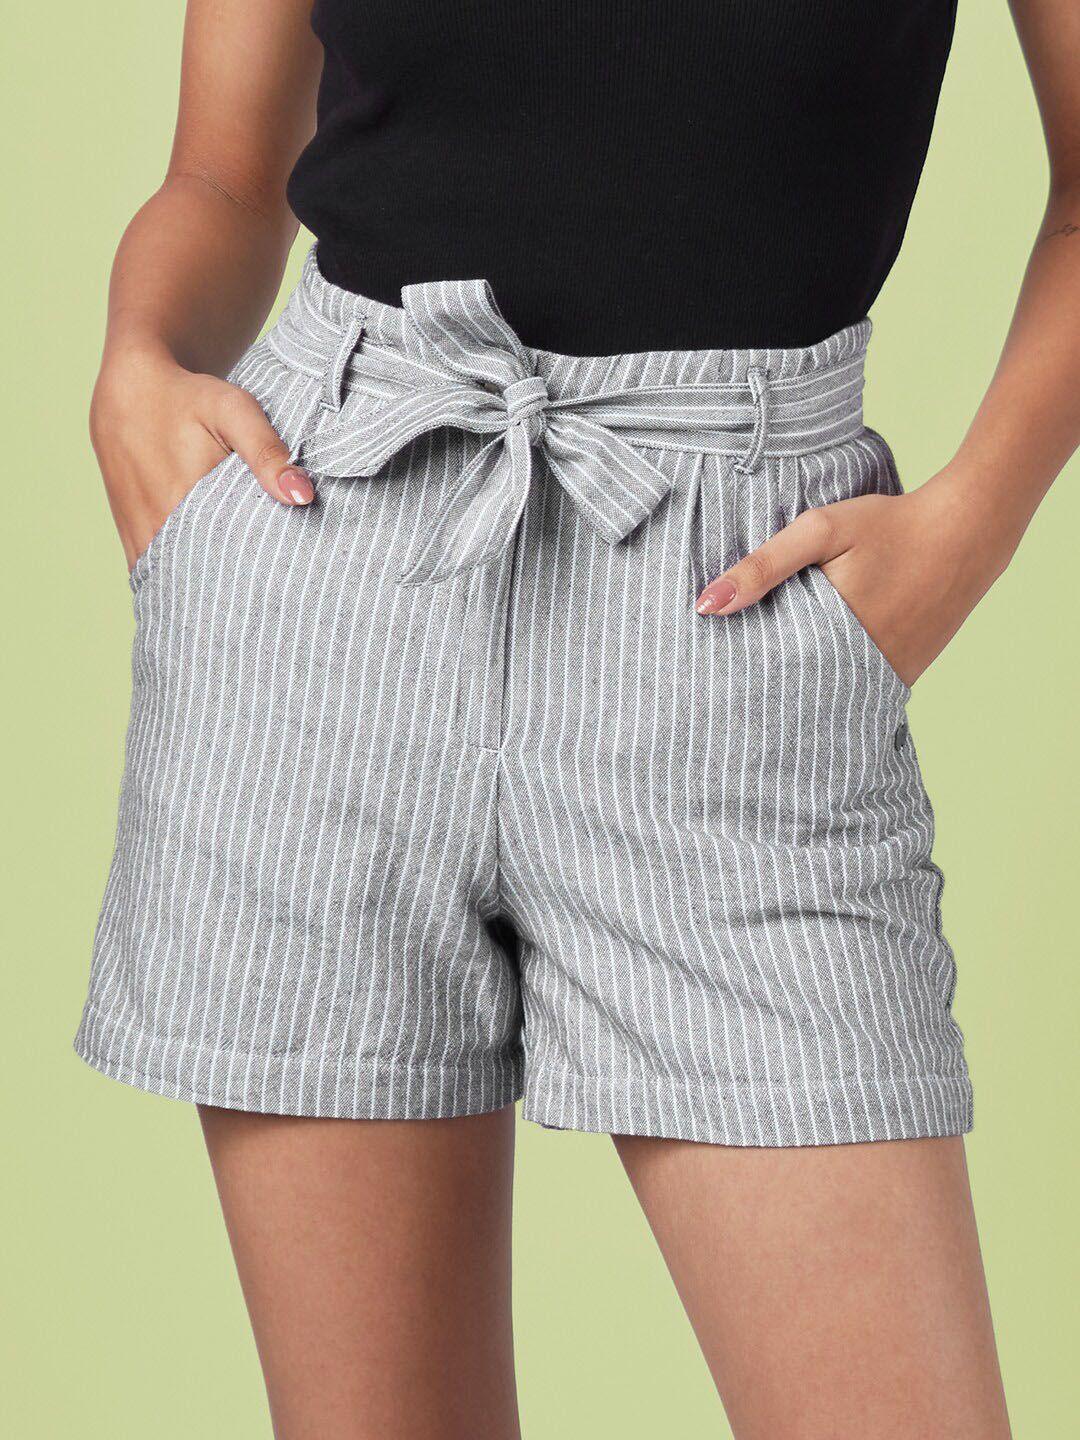 The Souled Store Women Grey Striped High-Rise Outdoor Shorts